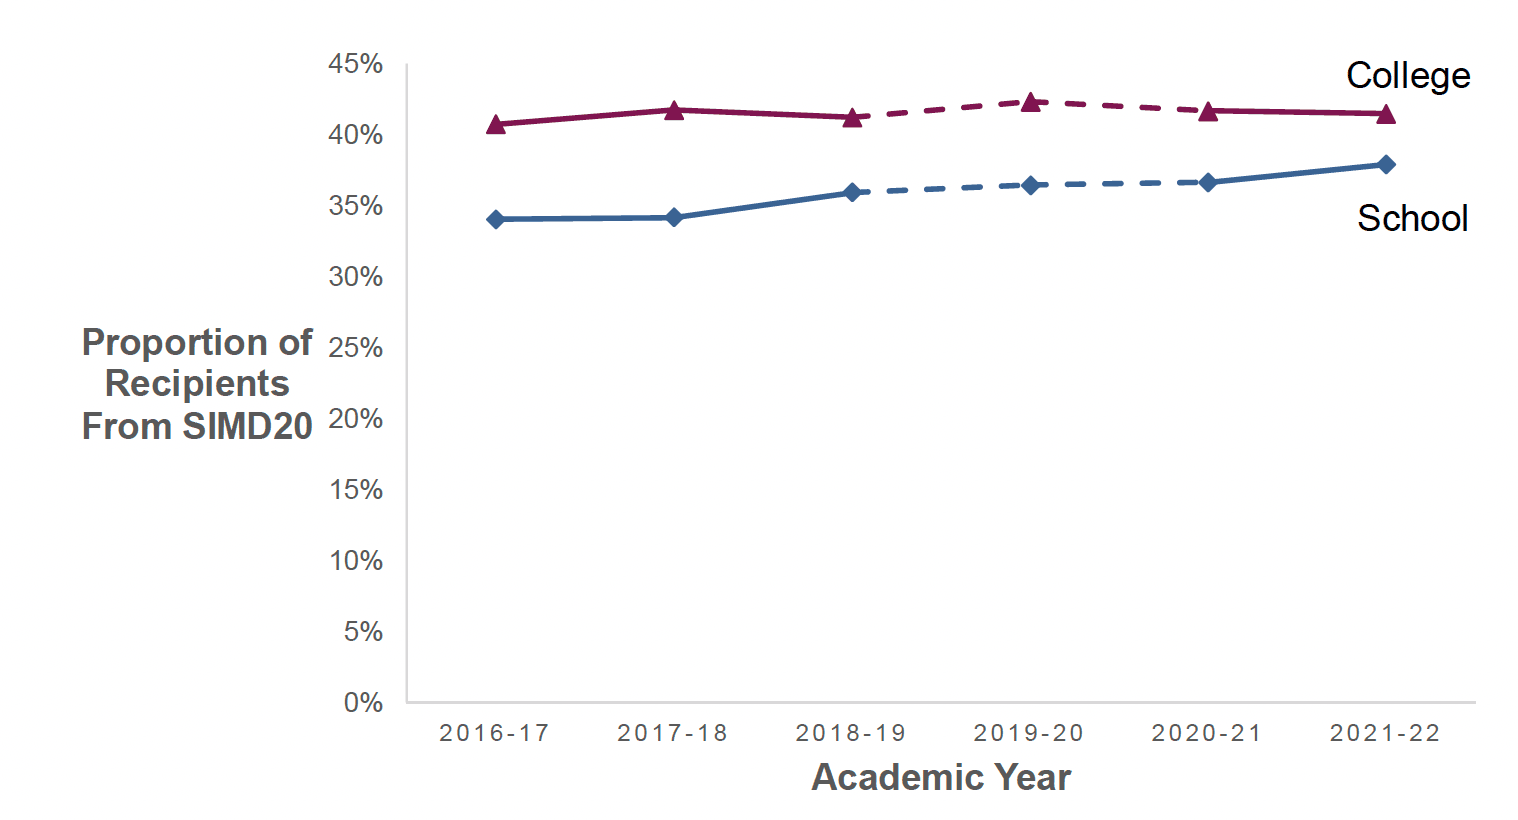 This figure shows that 38% of EMA recipients in school and 41% of college recipients were from the 20% most deprived areas. The figure shows that colleges consistently have a higher proportion of students from deprived areas, compared to schools.